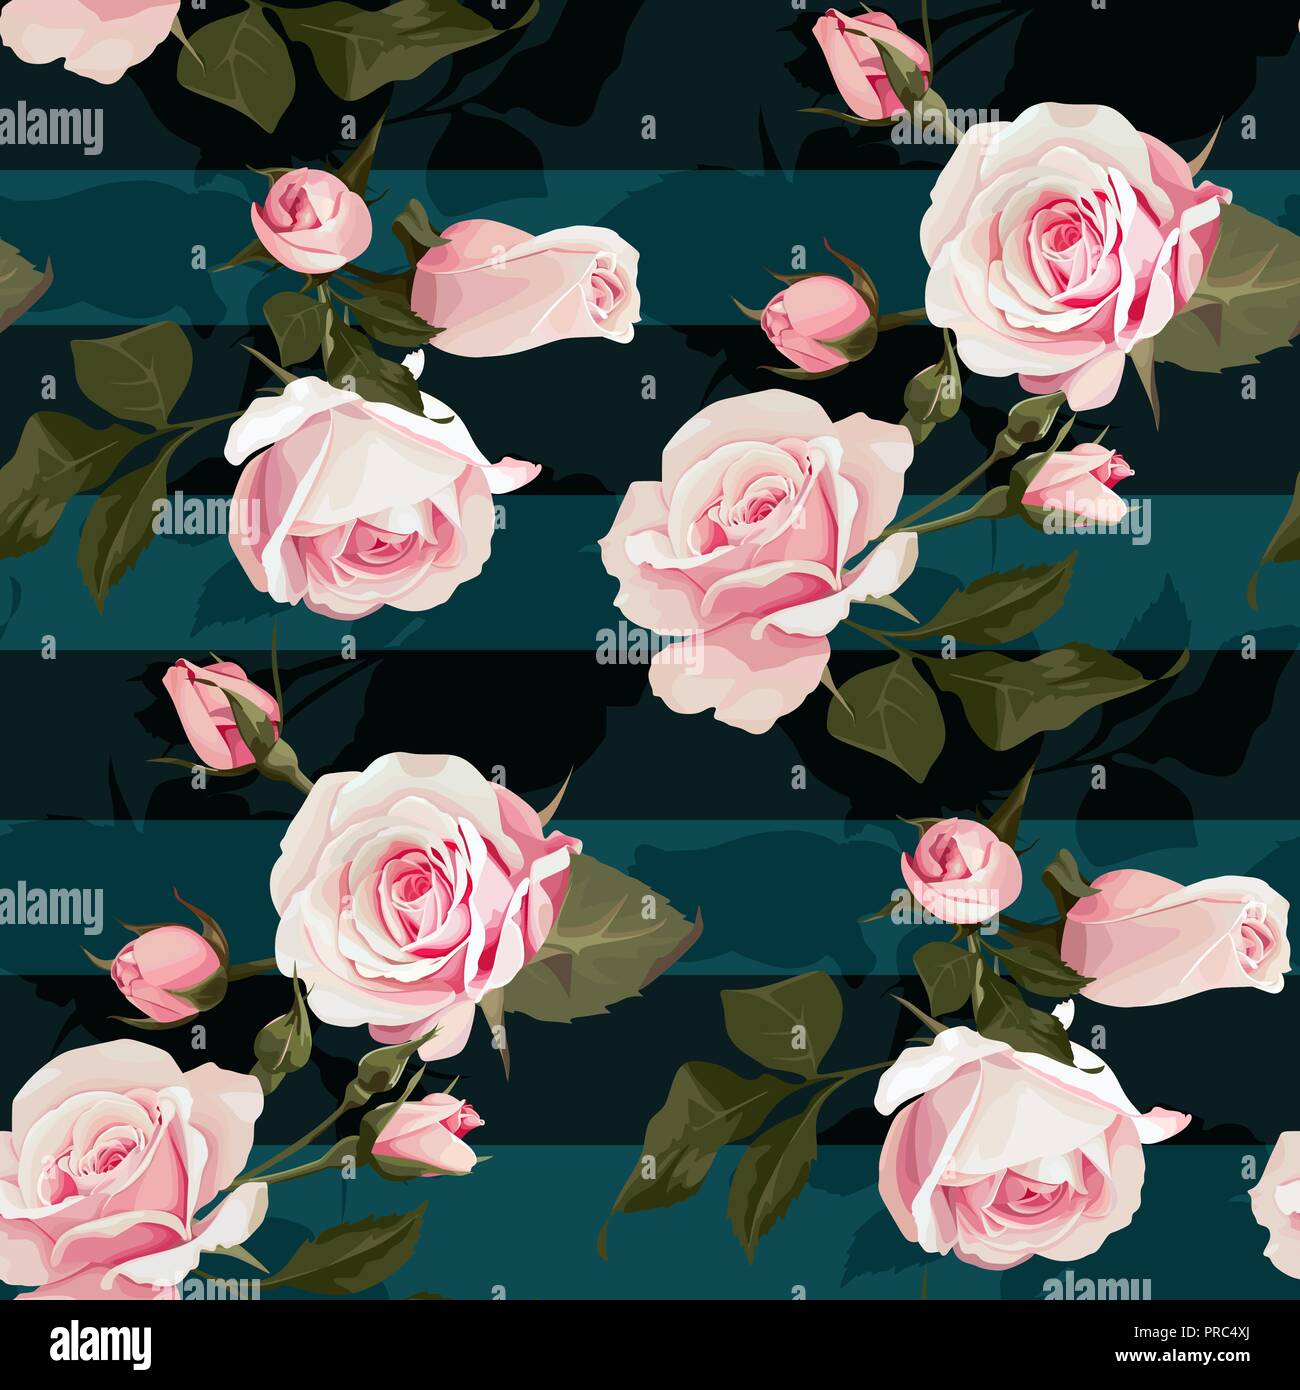 Pink roses vector seamles pattern. Realistic flowers on stripes background, floral texture Stock Vector